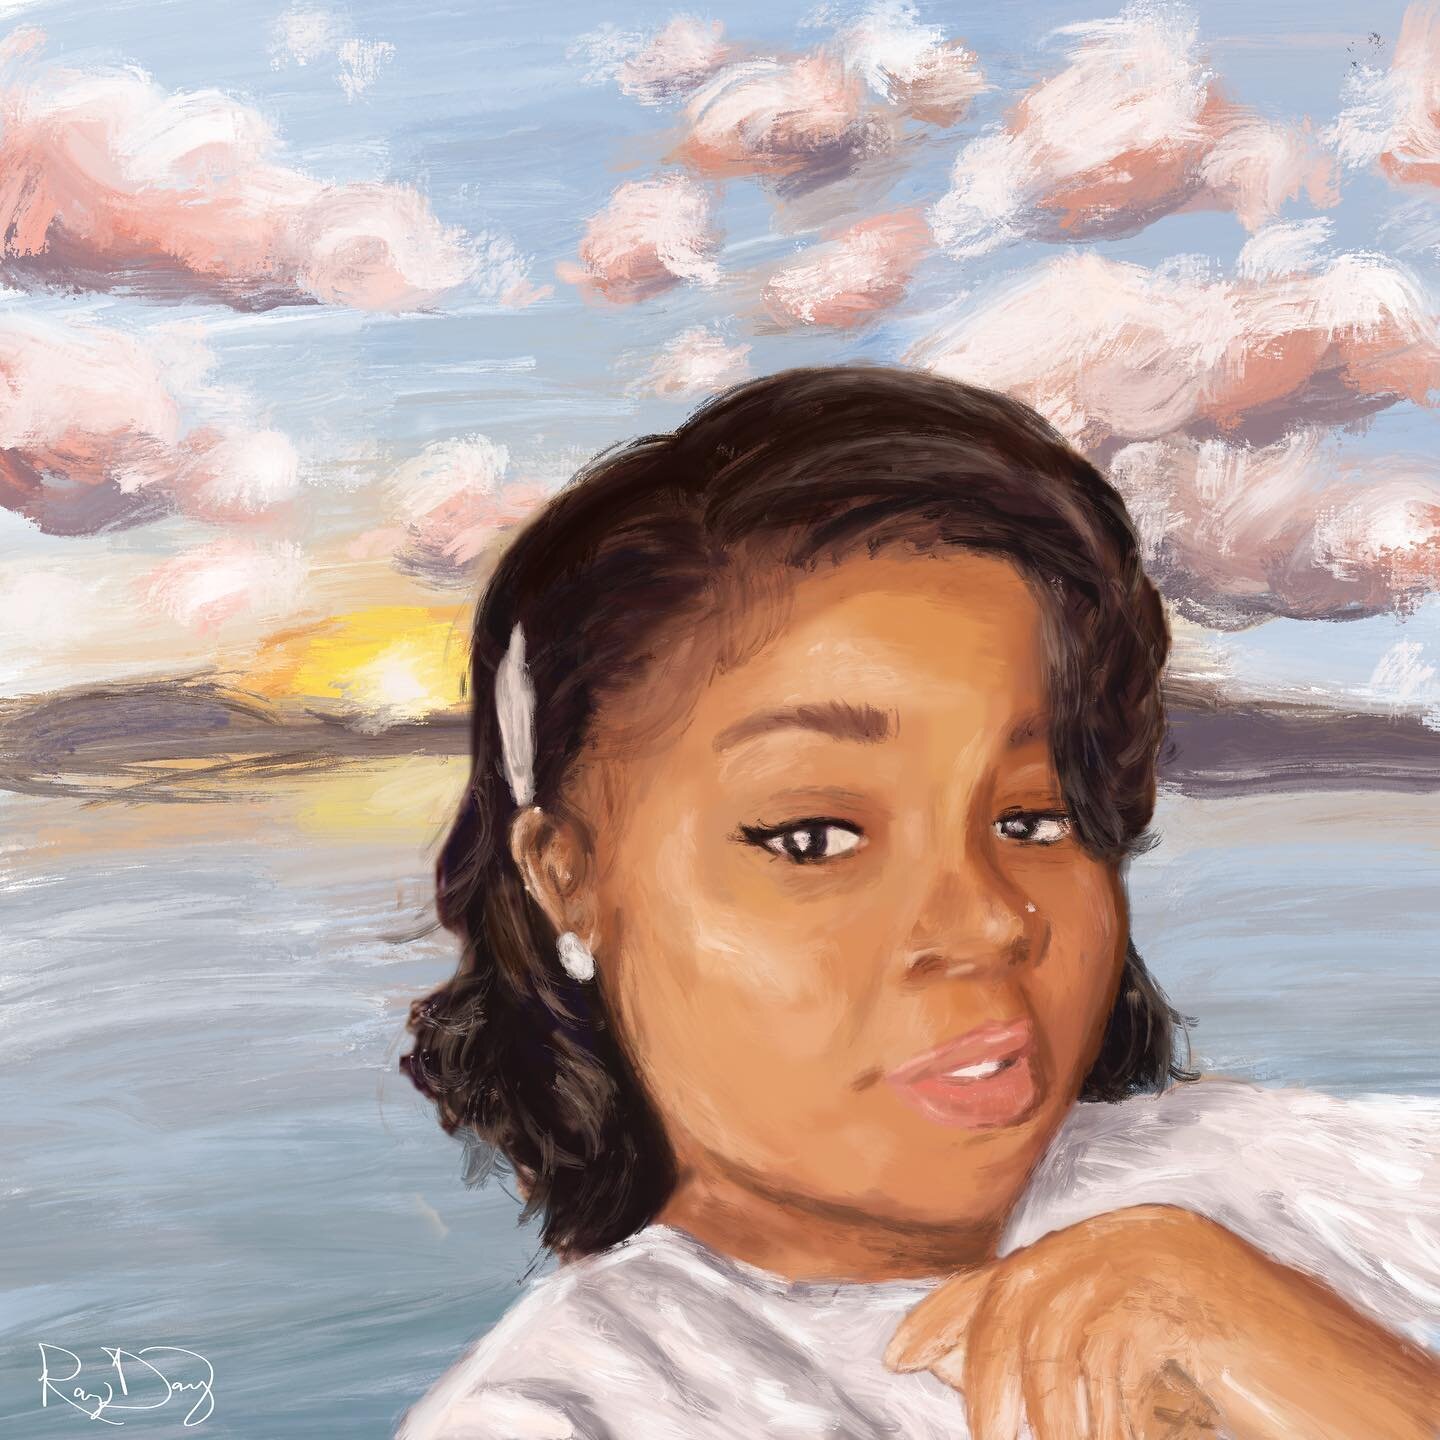 Breonna Taylor STILL deserves justice.

One year ago I got into painting again to process all that was going on in the world. One year later- the cops that murdered Breonna Taylor are still free. We will keep saying her name. Rest in power.